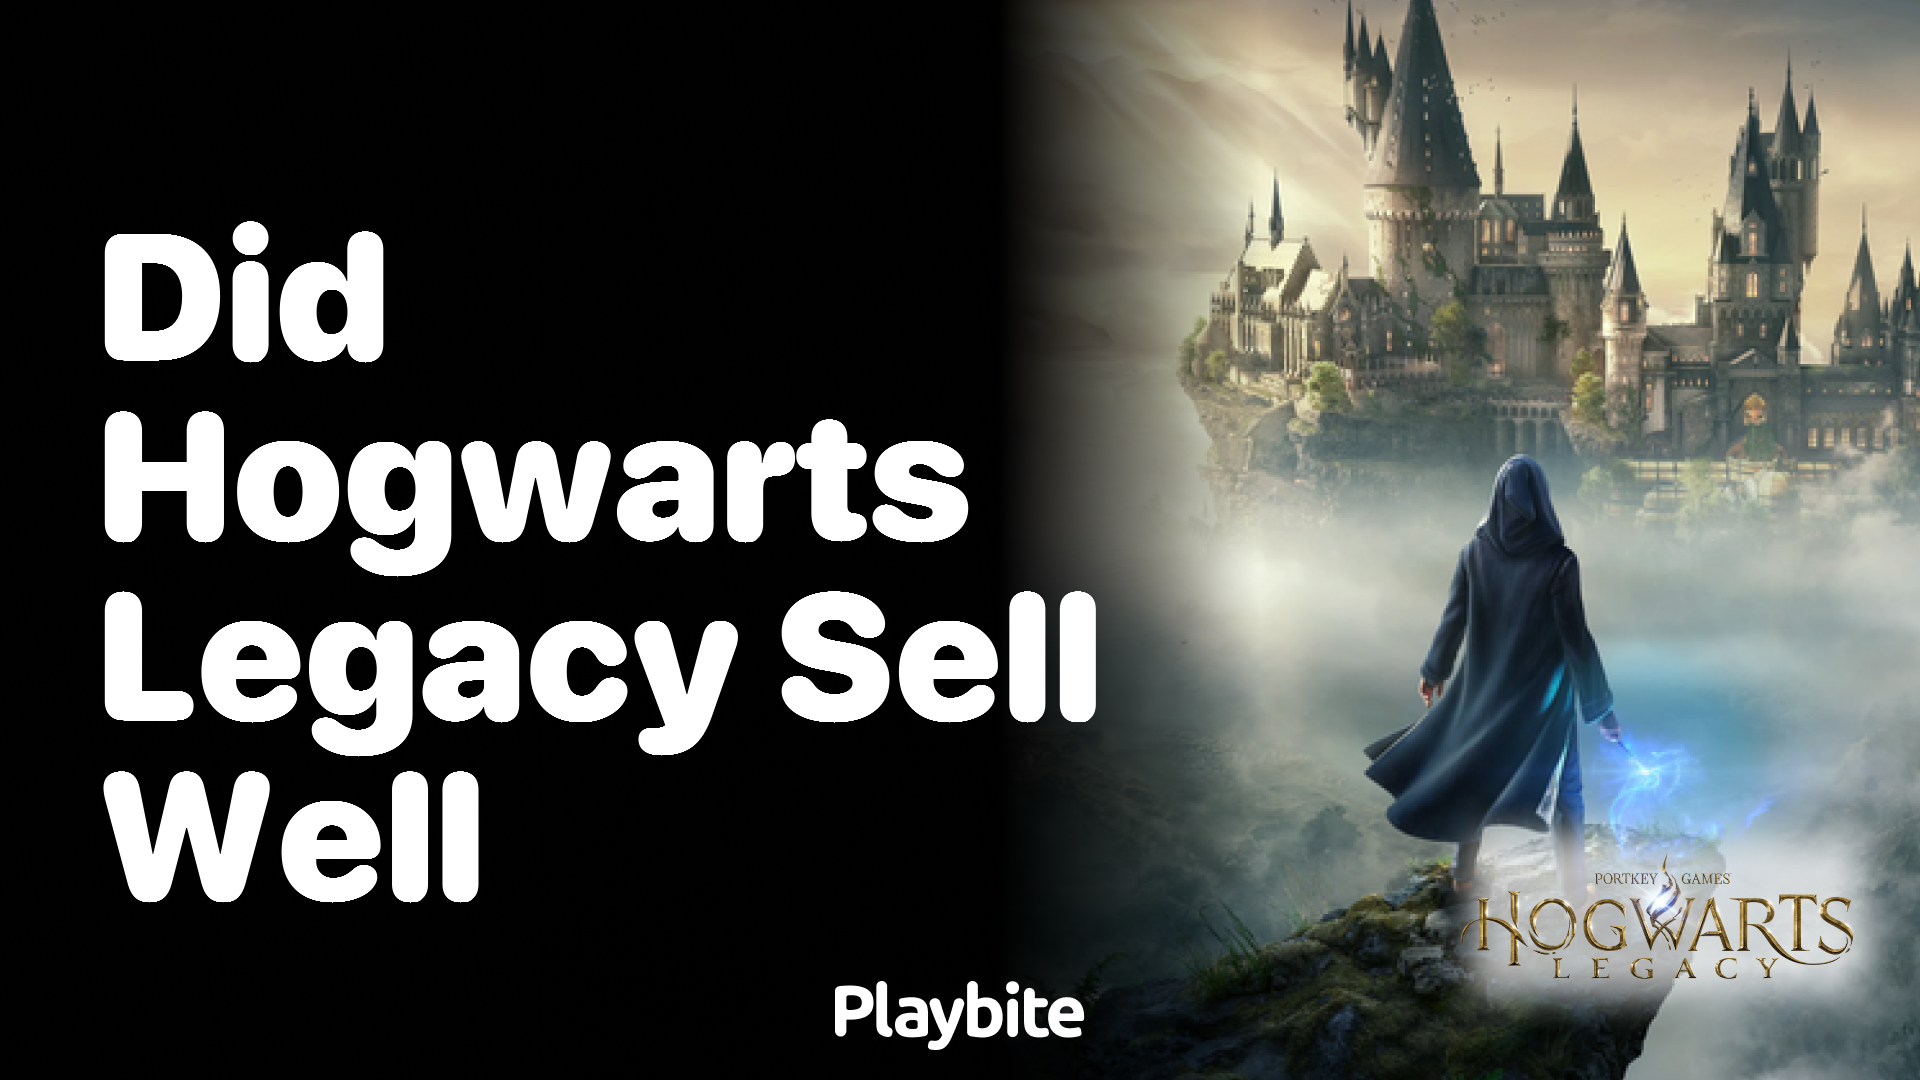 How well did Hogwarts Legacy sell?